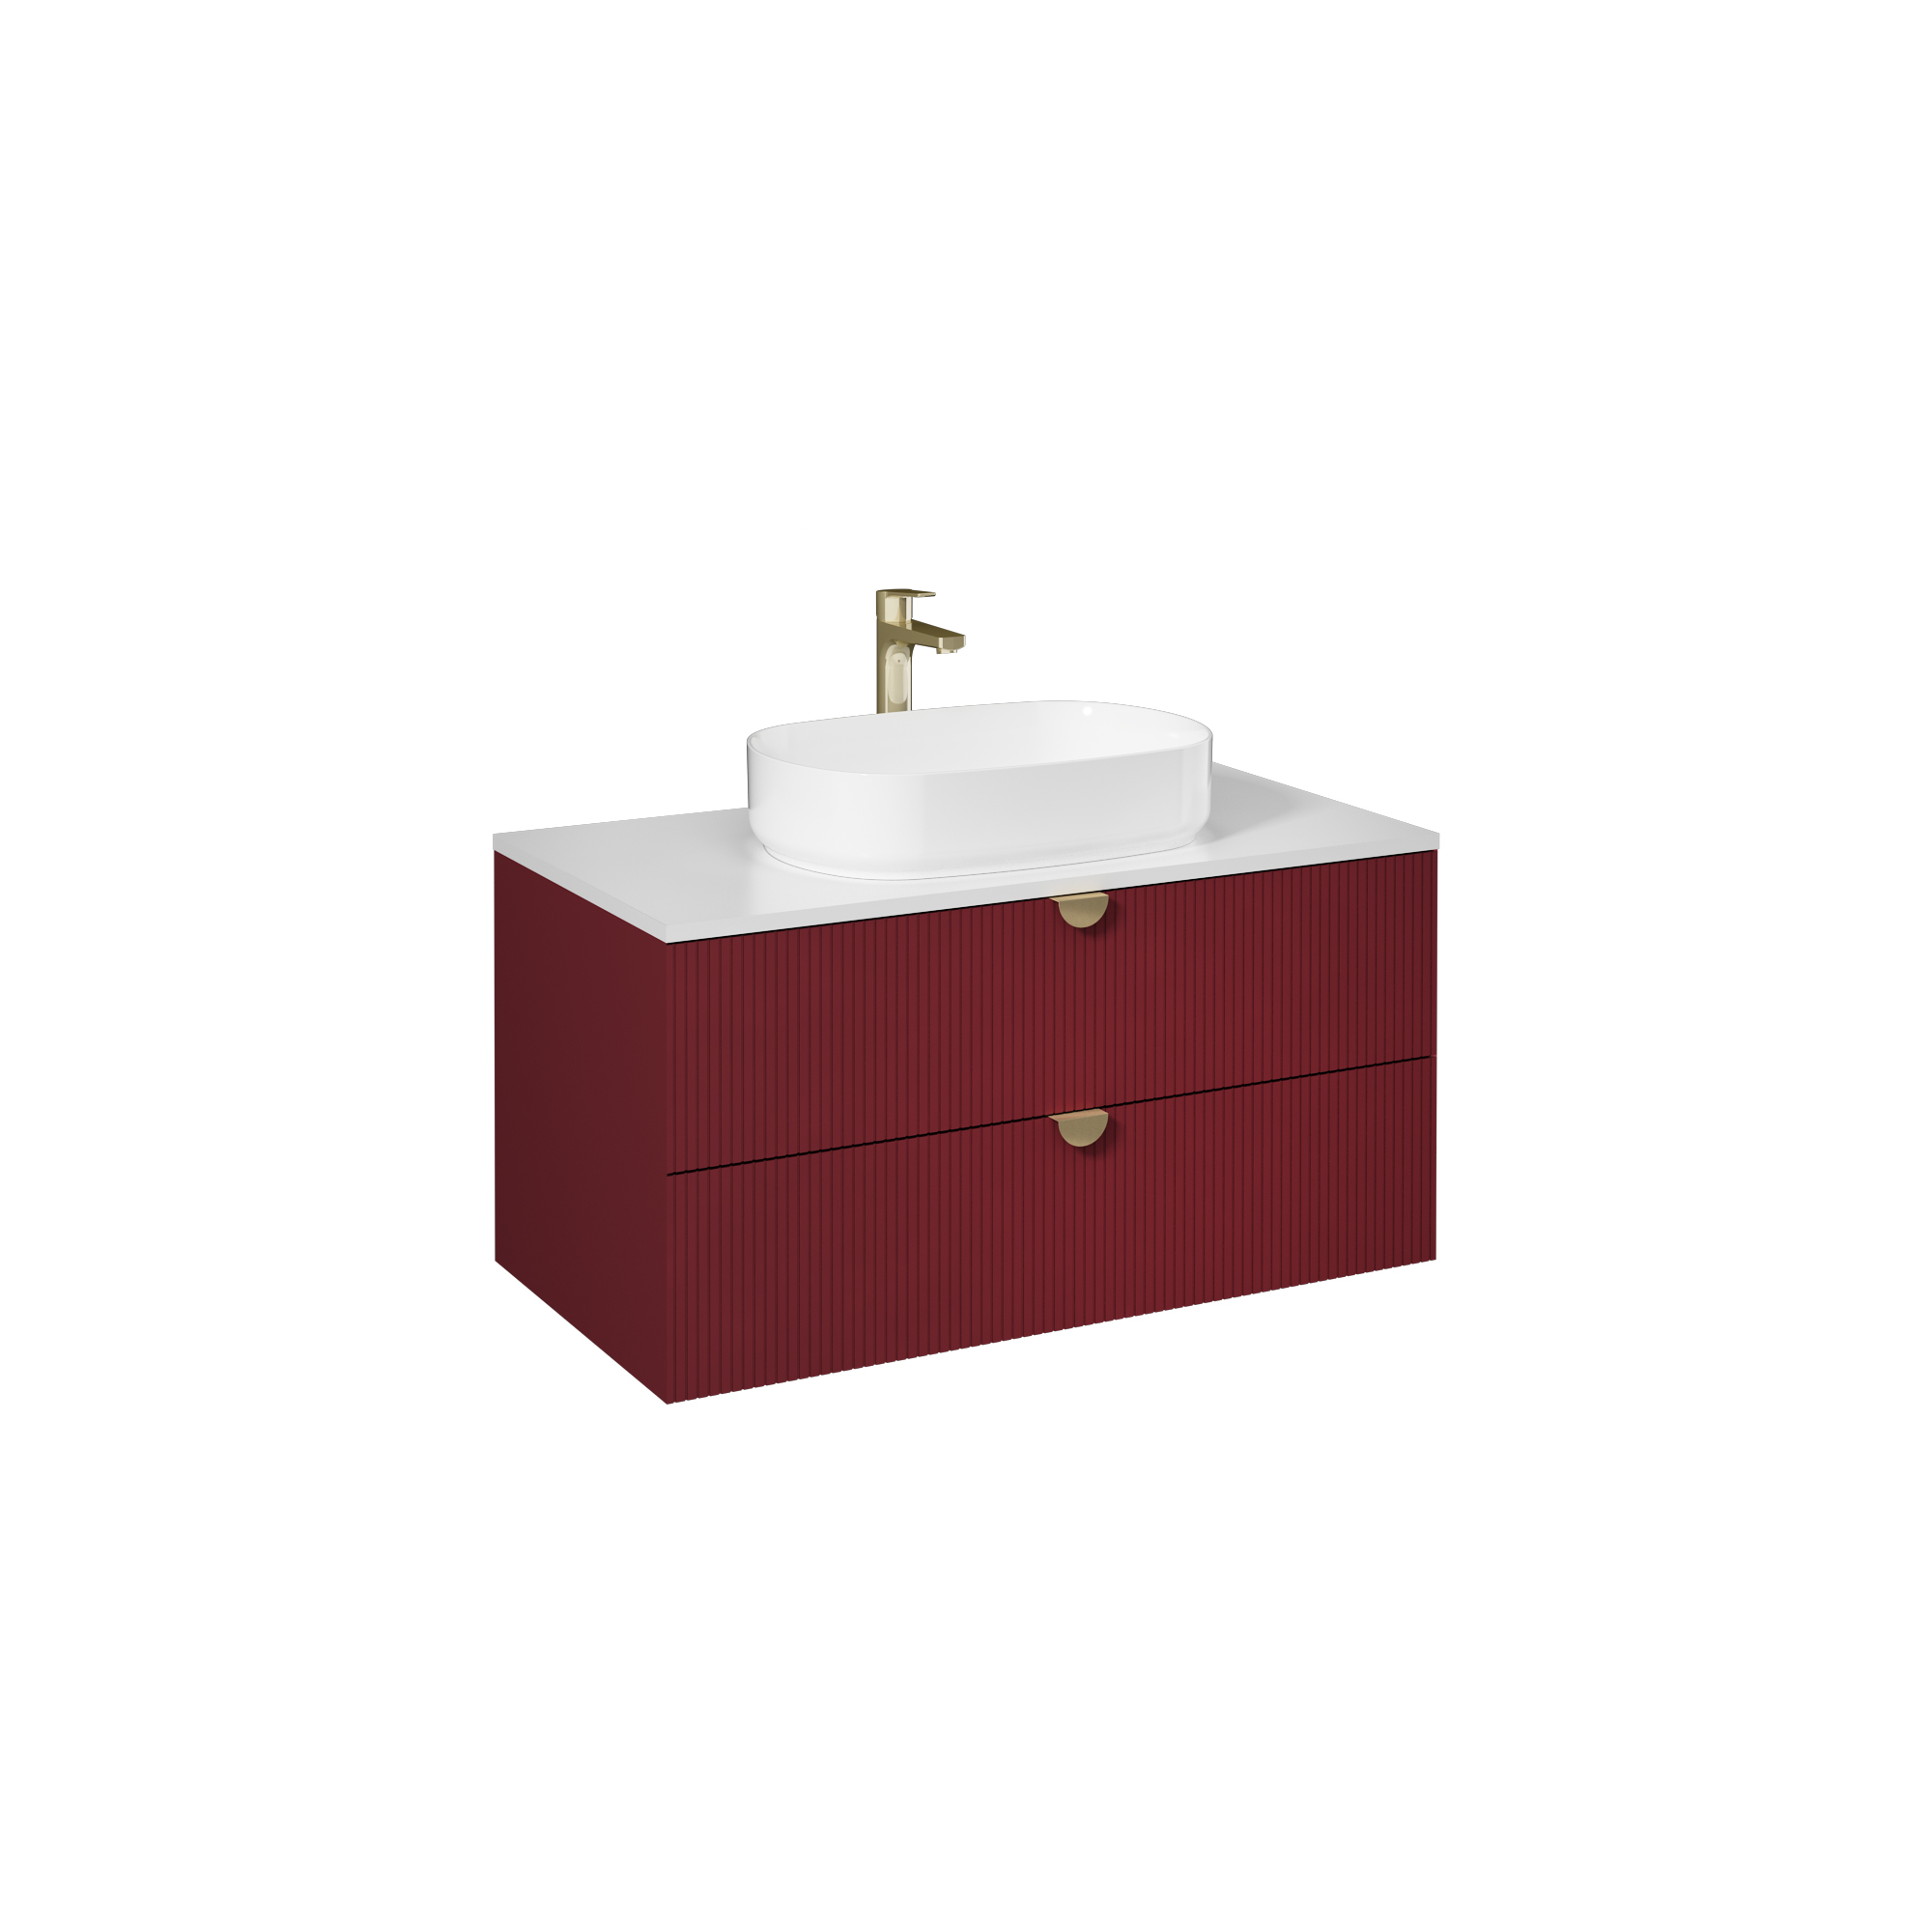 Infinity Washbasin Cabinet, Ruby Red 31"